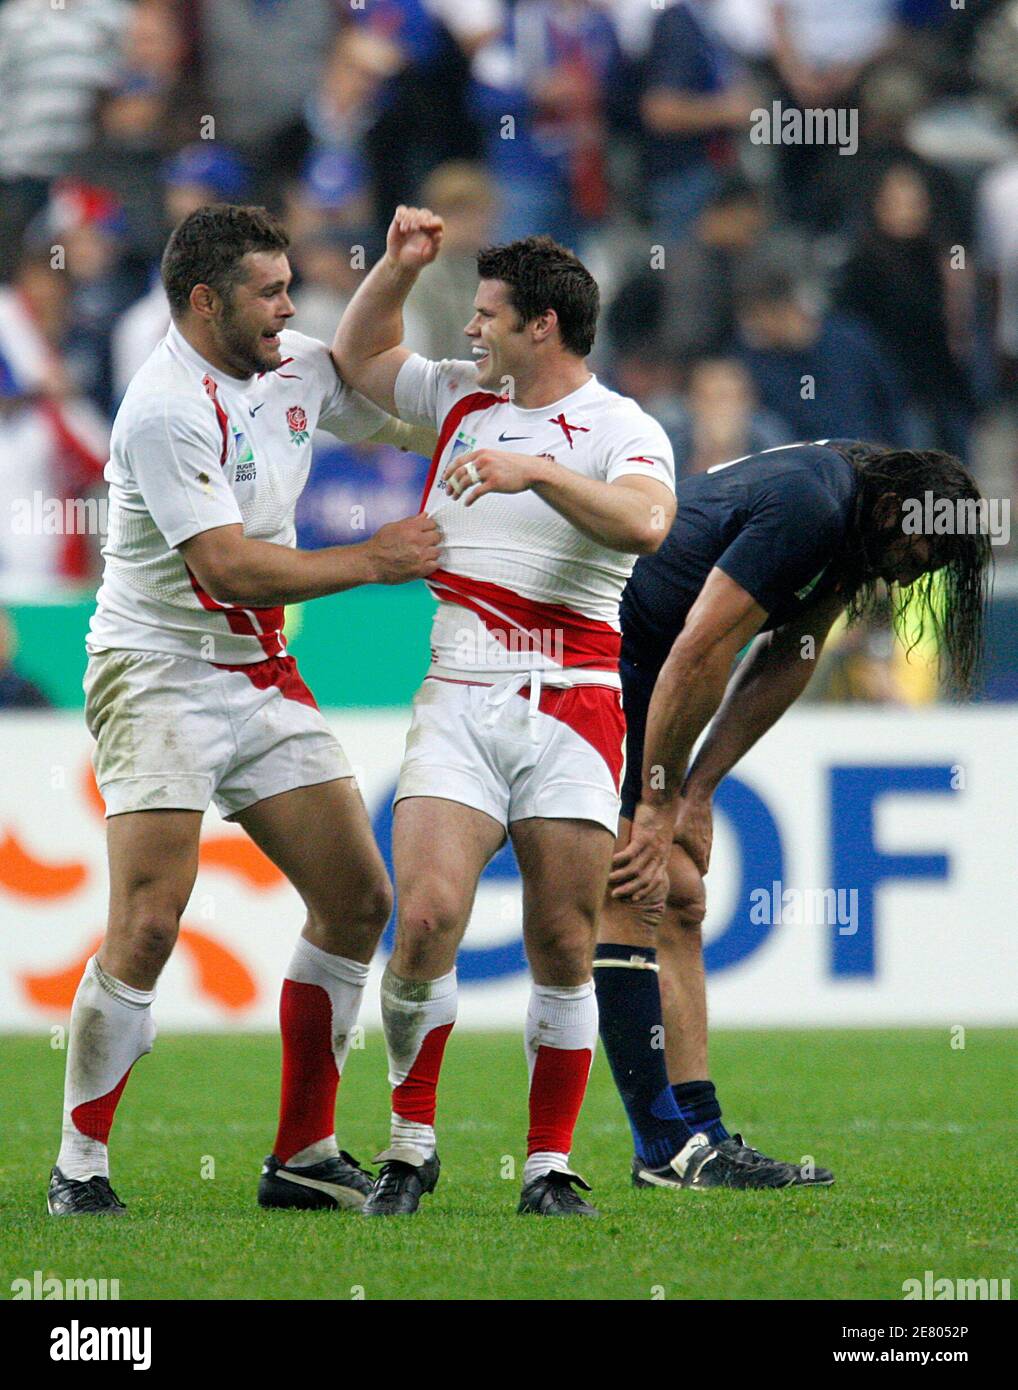 France's Sebastien Chabal (L) reacts near team mate Pieter de Villiers in  the Group D Rugby World Cup match against Ireland at the Stade de France  Stadium in Saint-Denis, near Paris, September